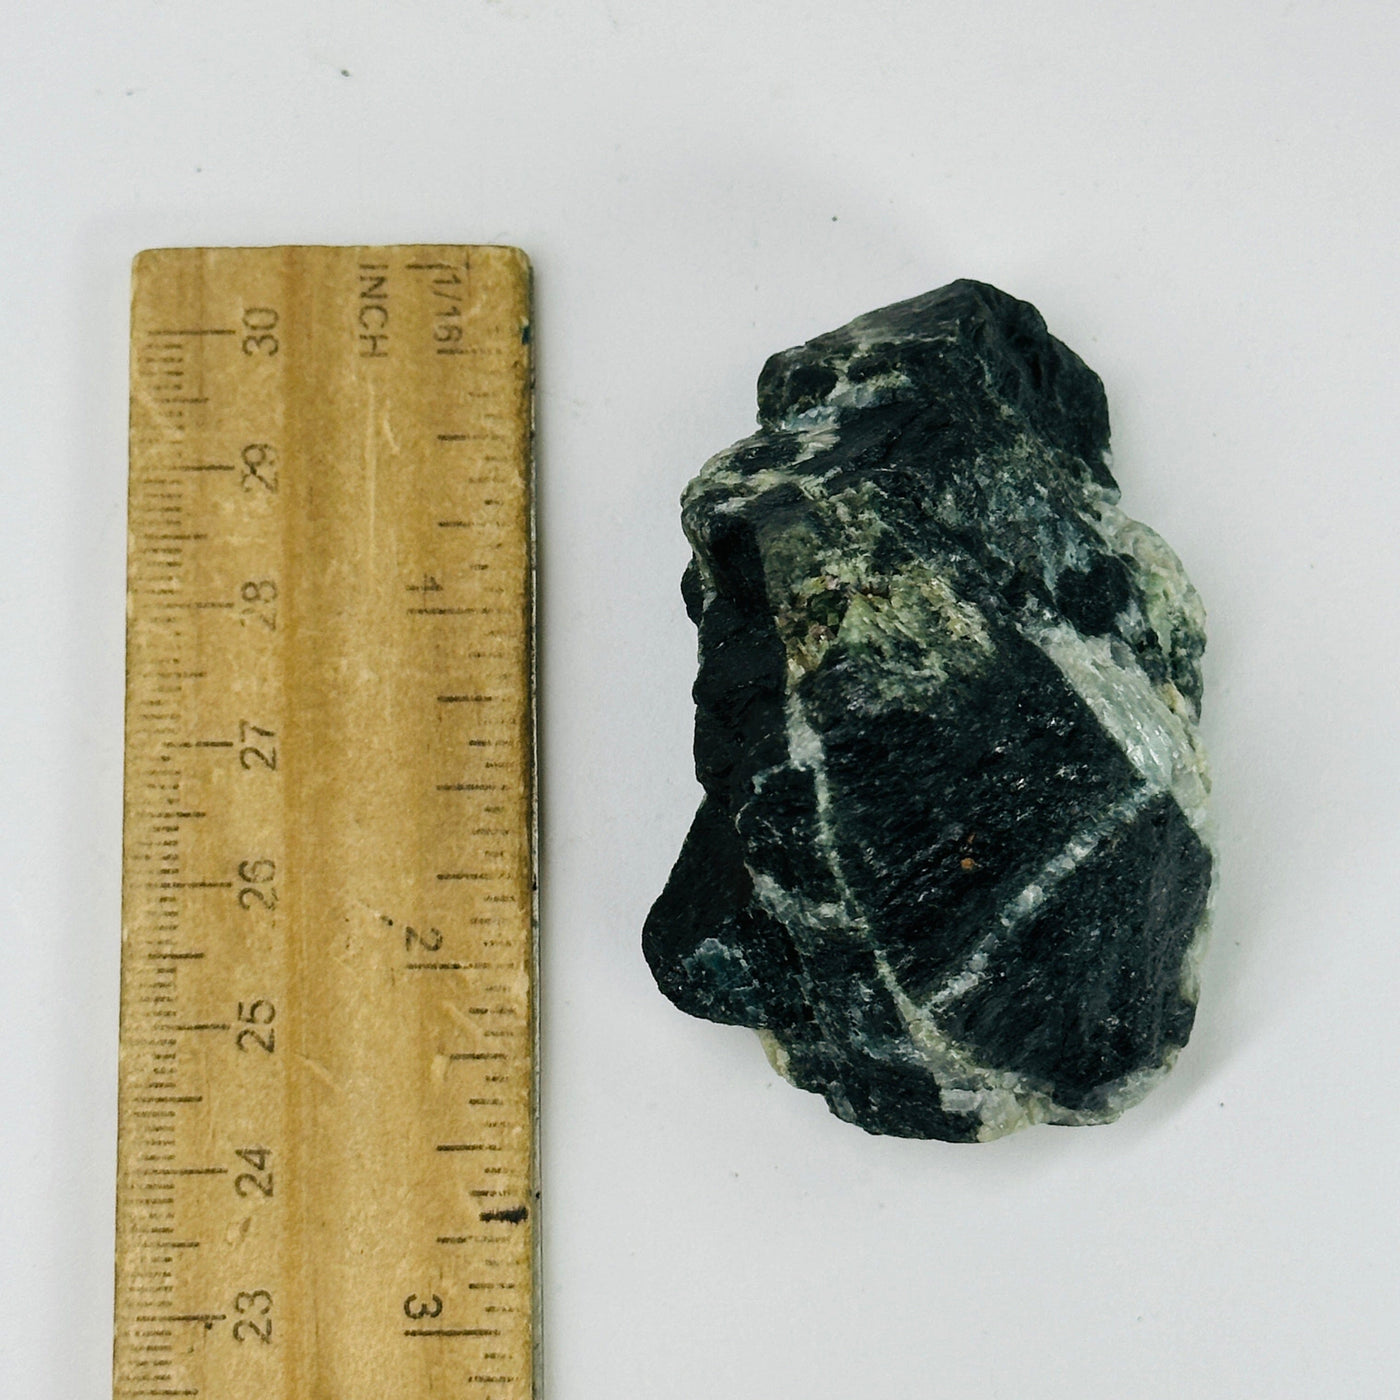 tourmaline next to a ruler for size reference